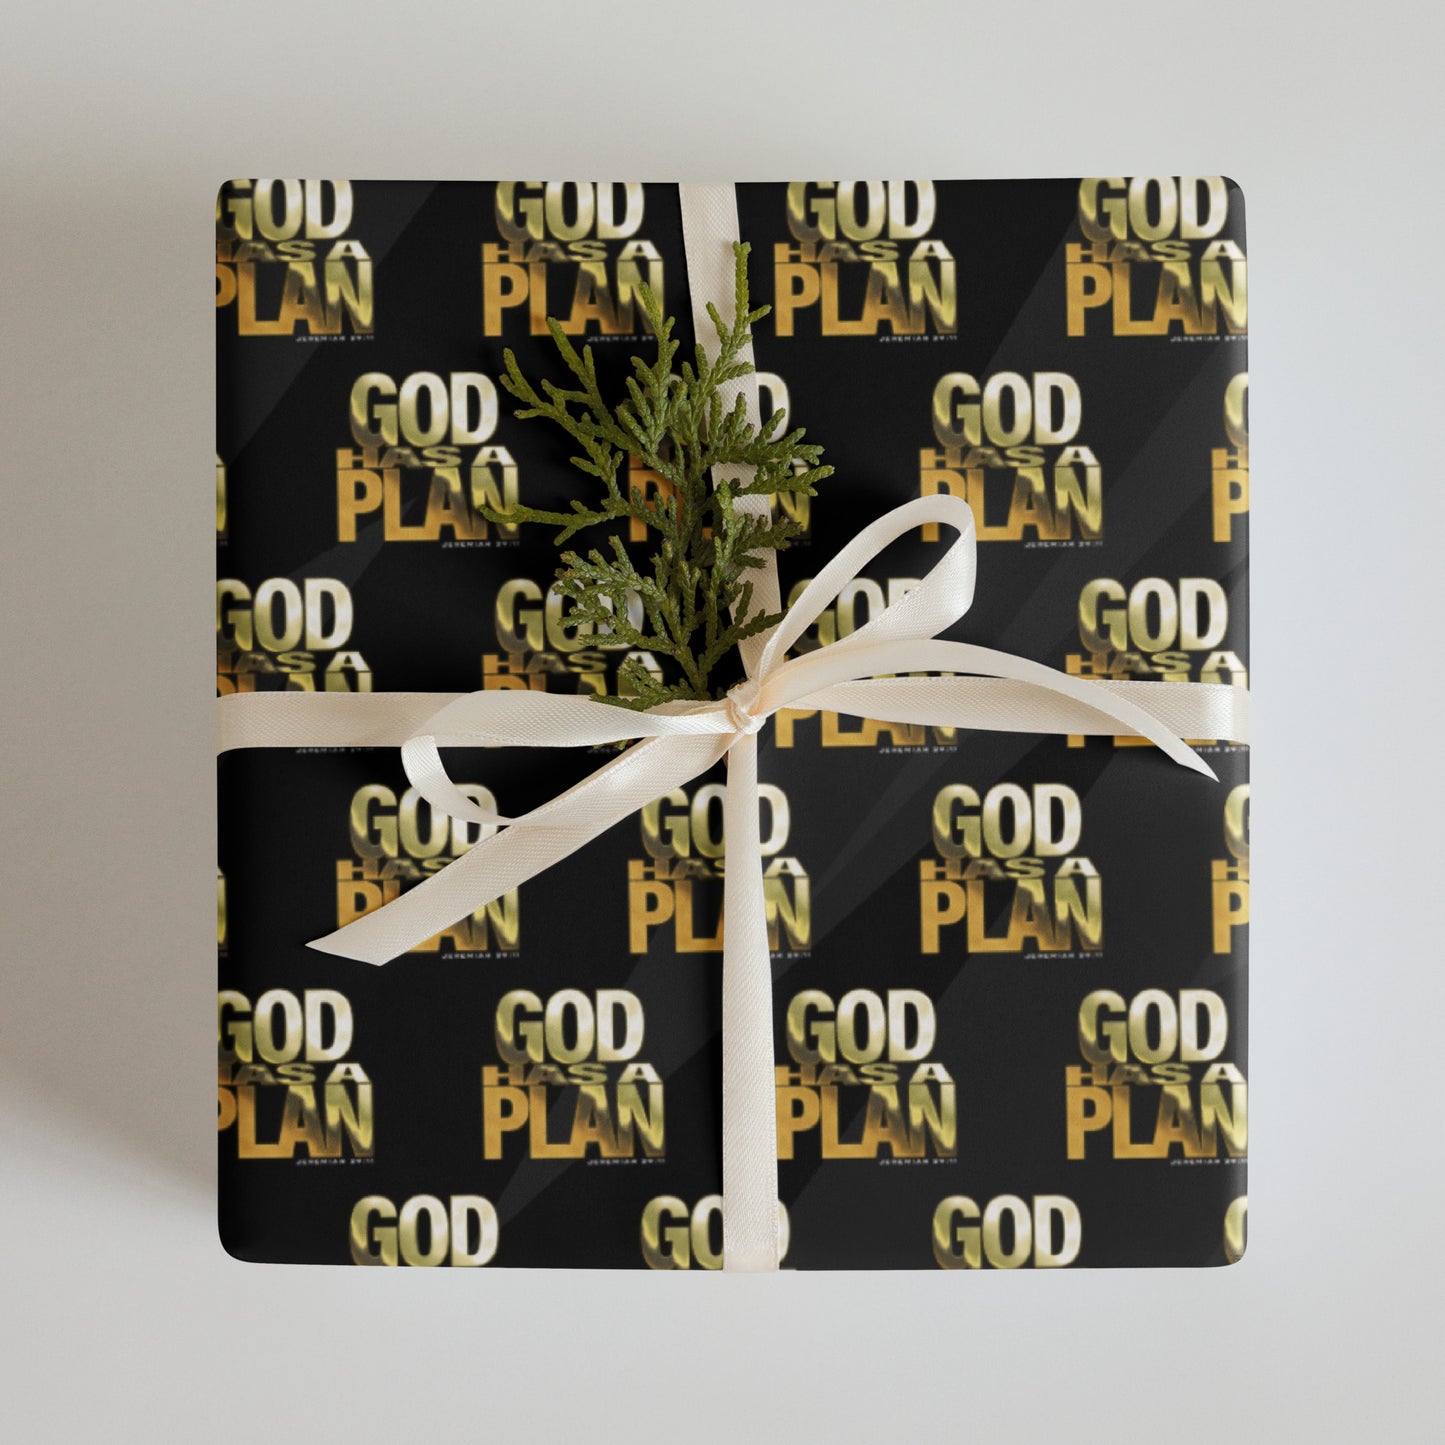 Wrapping paper sheets (God Has a plan, Daughter of a King)